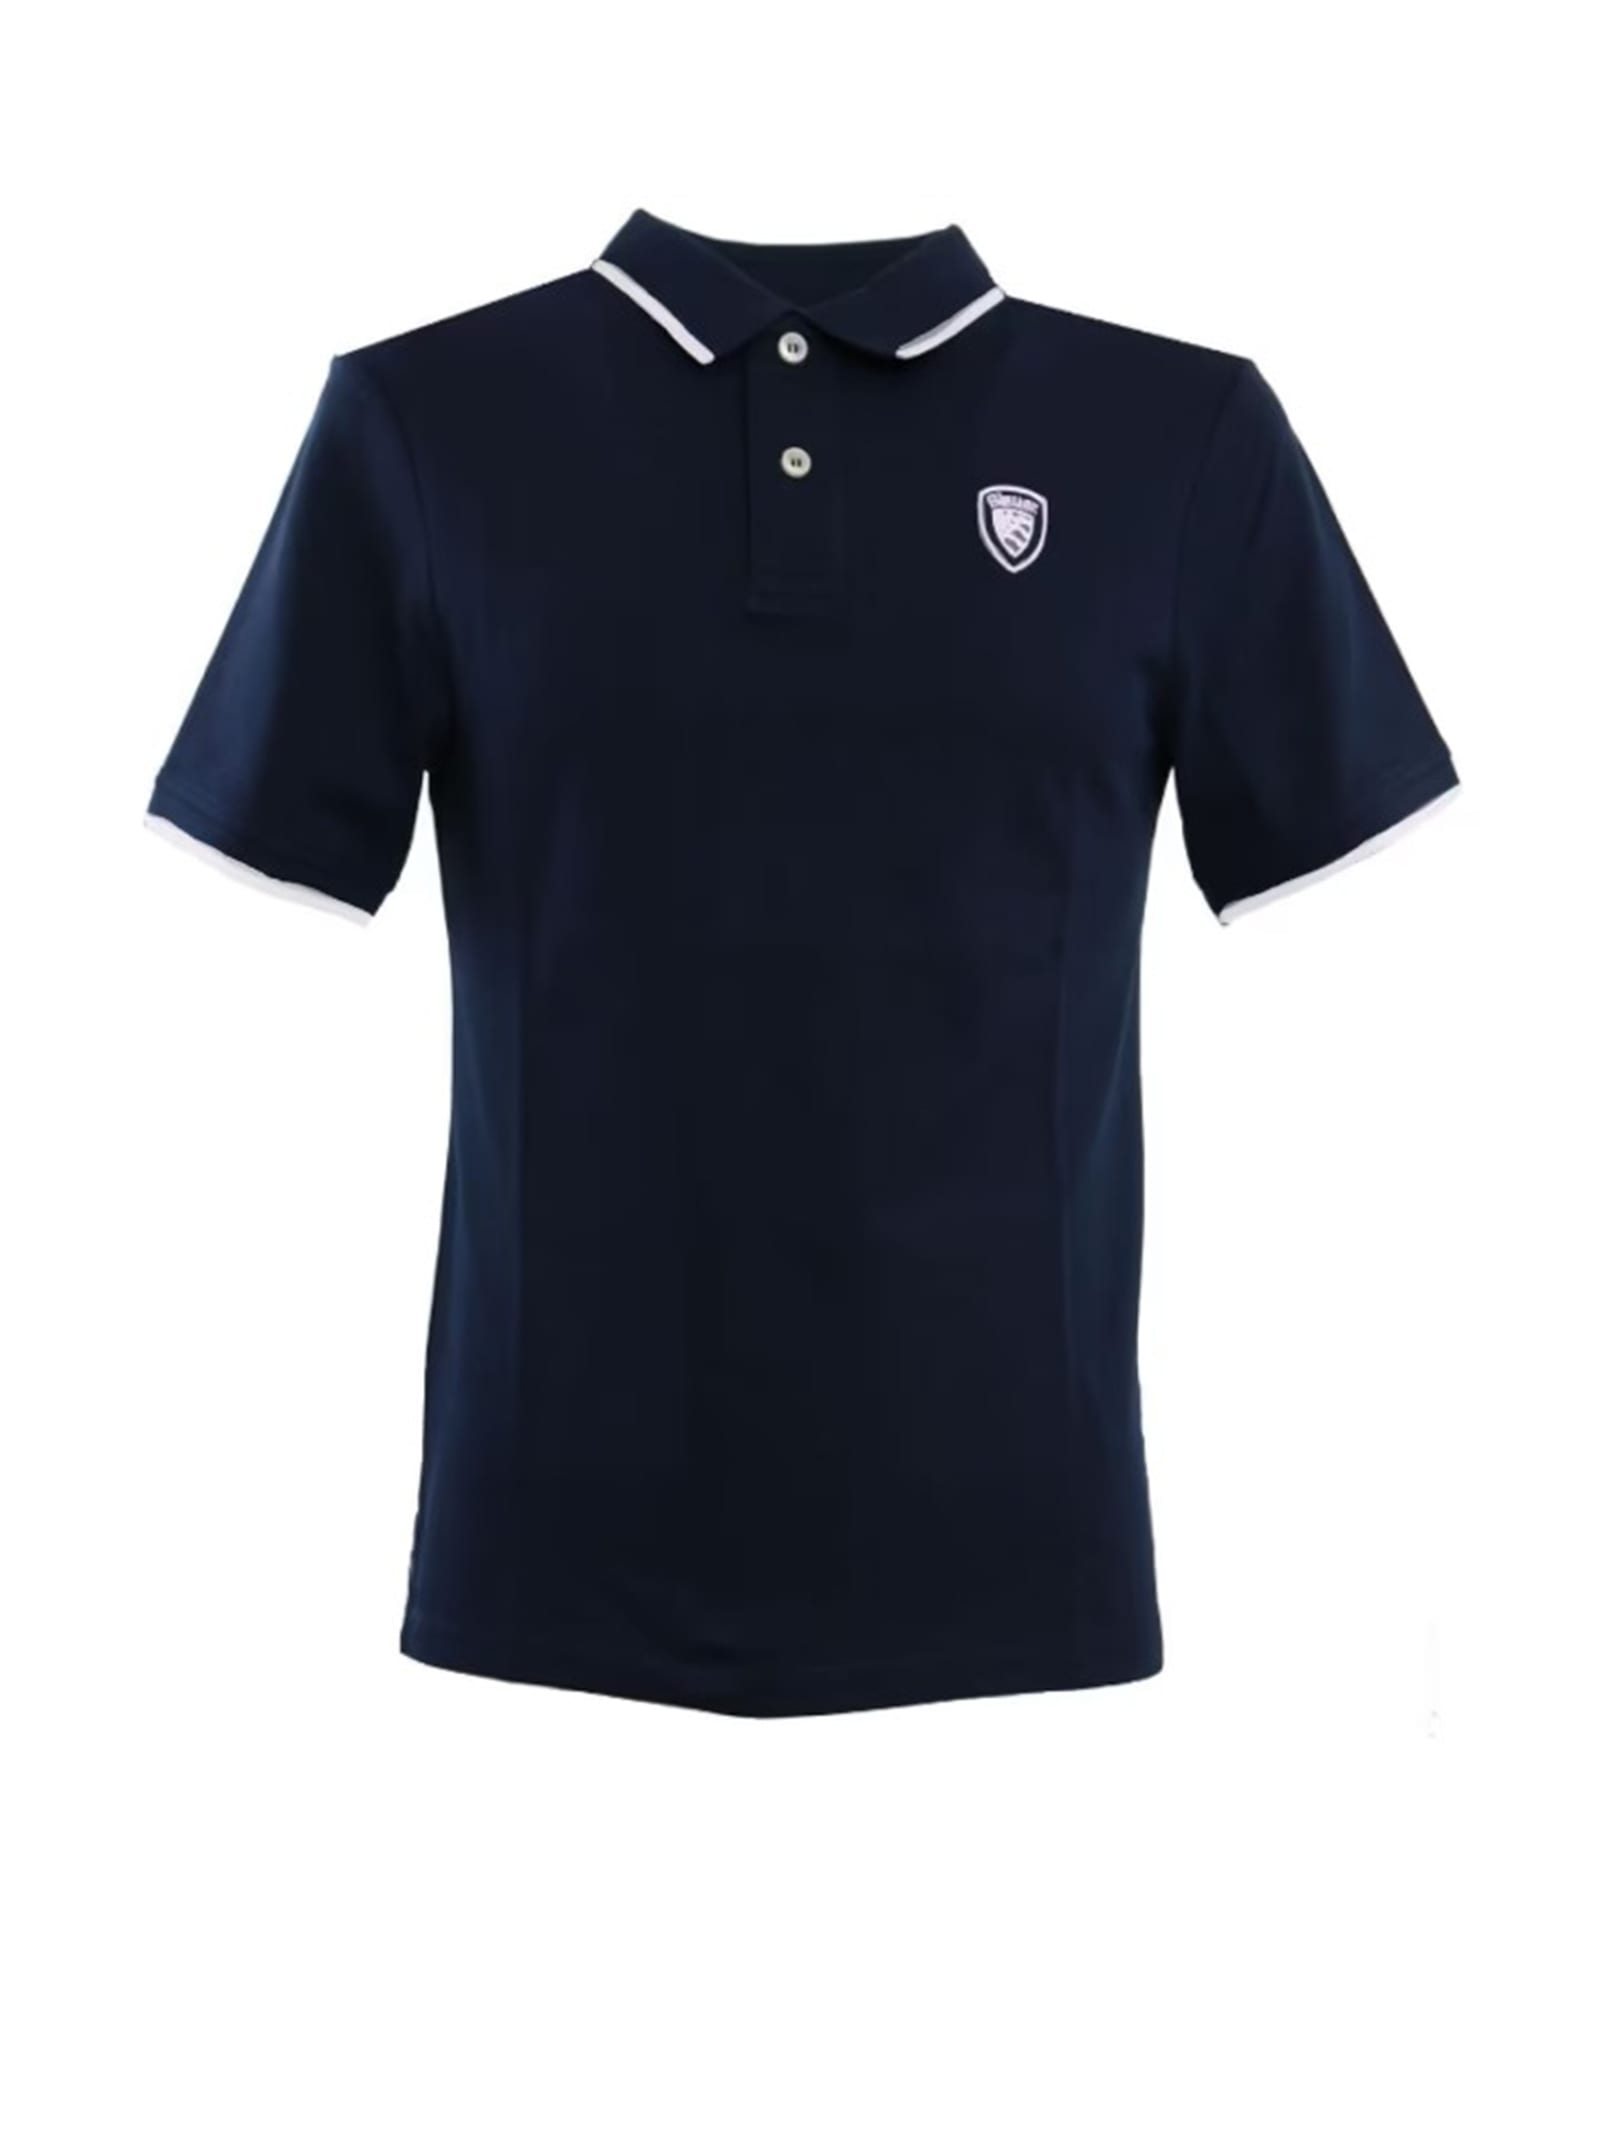 Navy Blue Short-sleeved Polo Shirt With Inserts